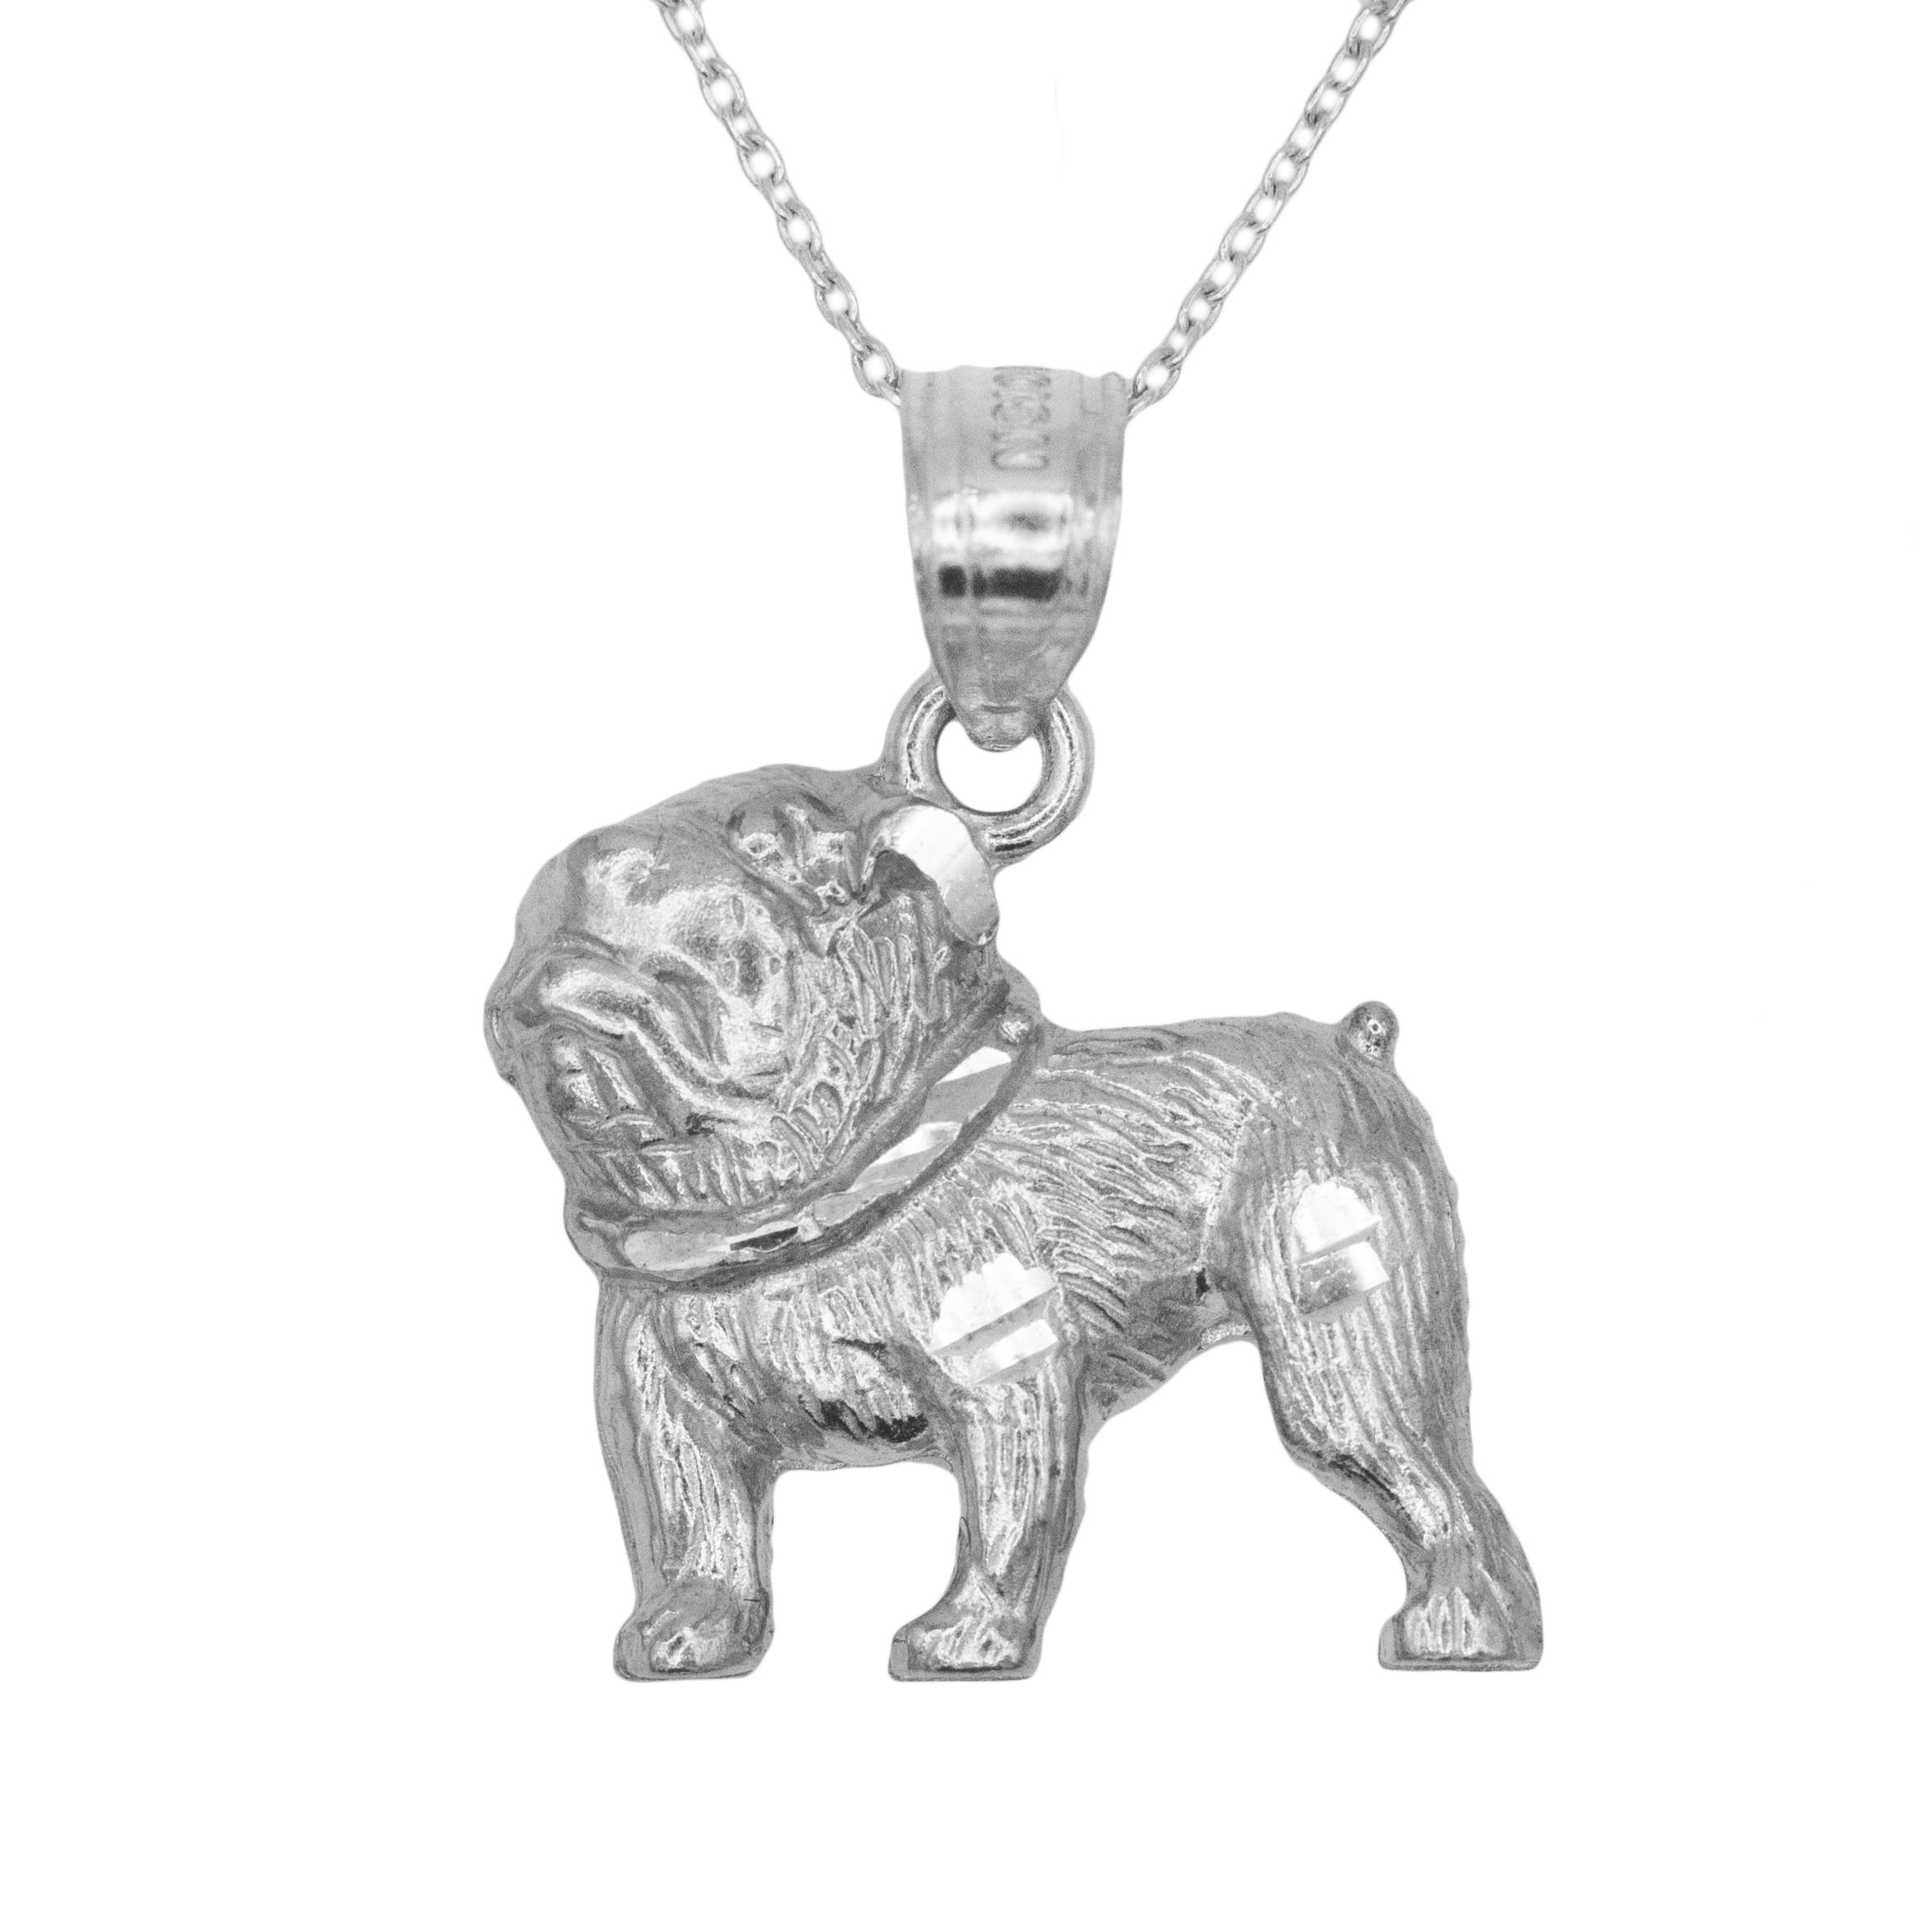 gold dog charms for necklaces